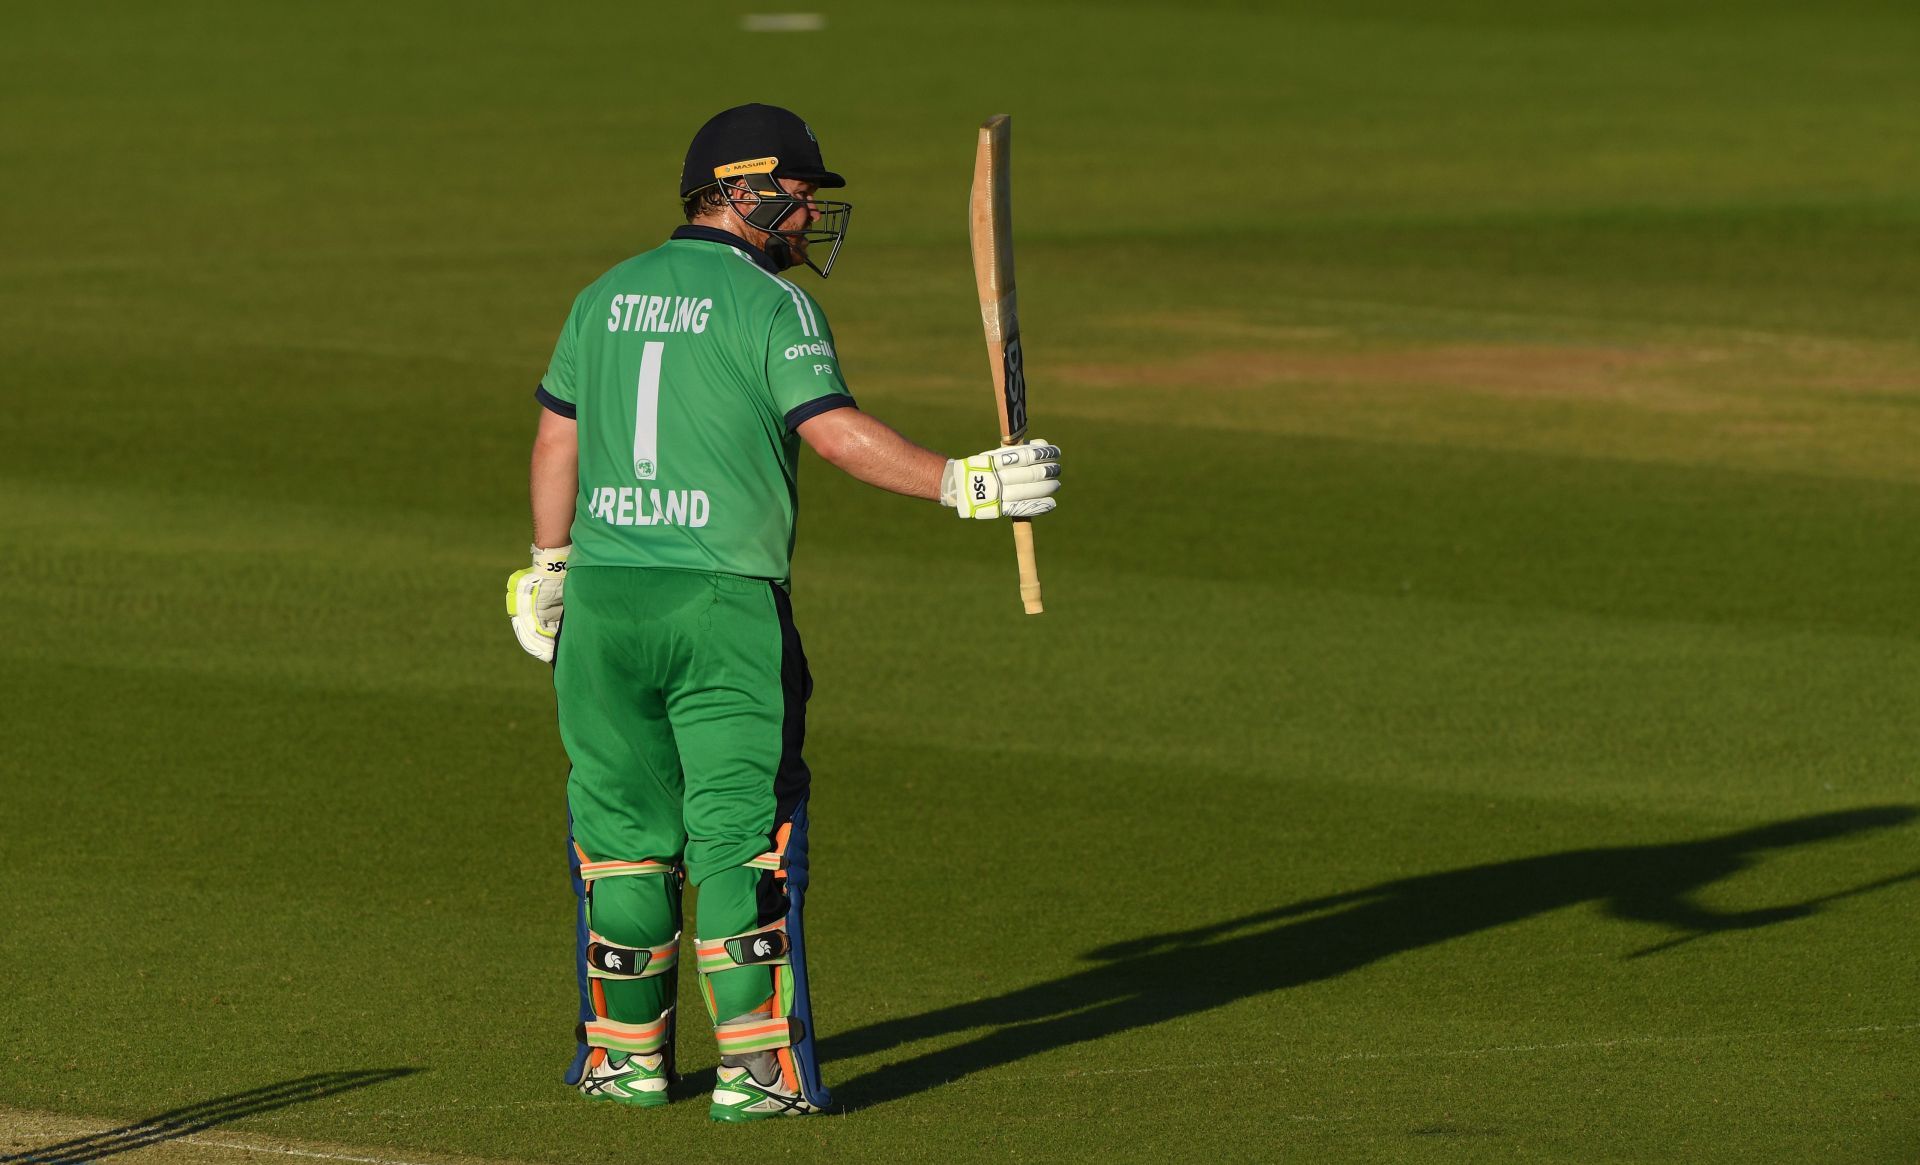 Paul Stirling will be a vital member of the Irish batting lineup